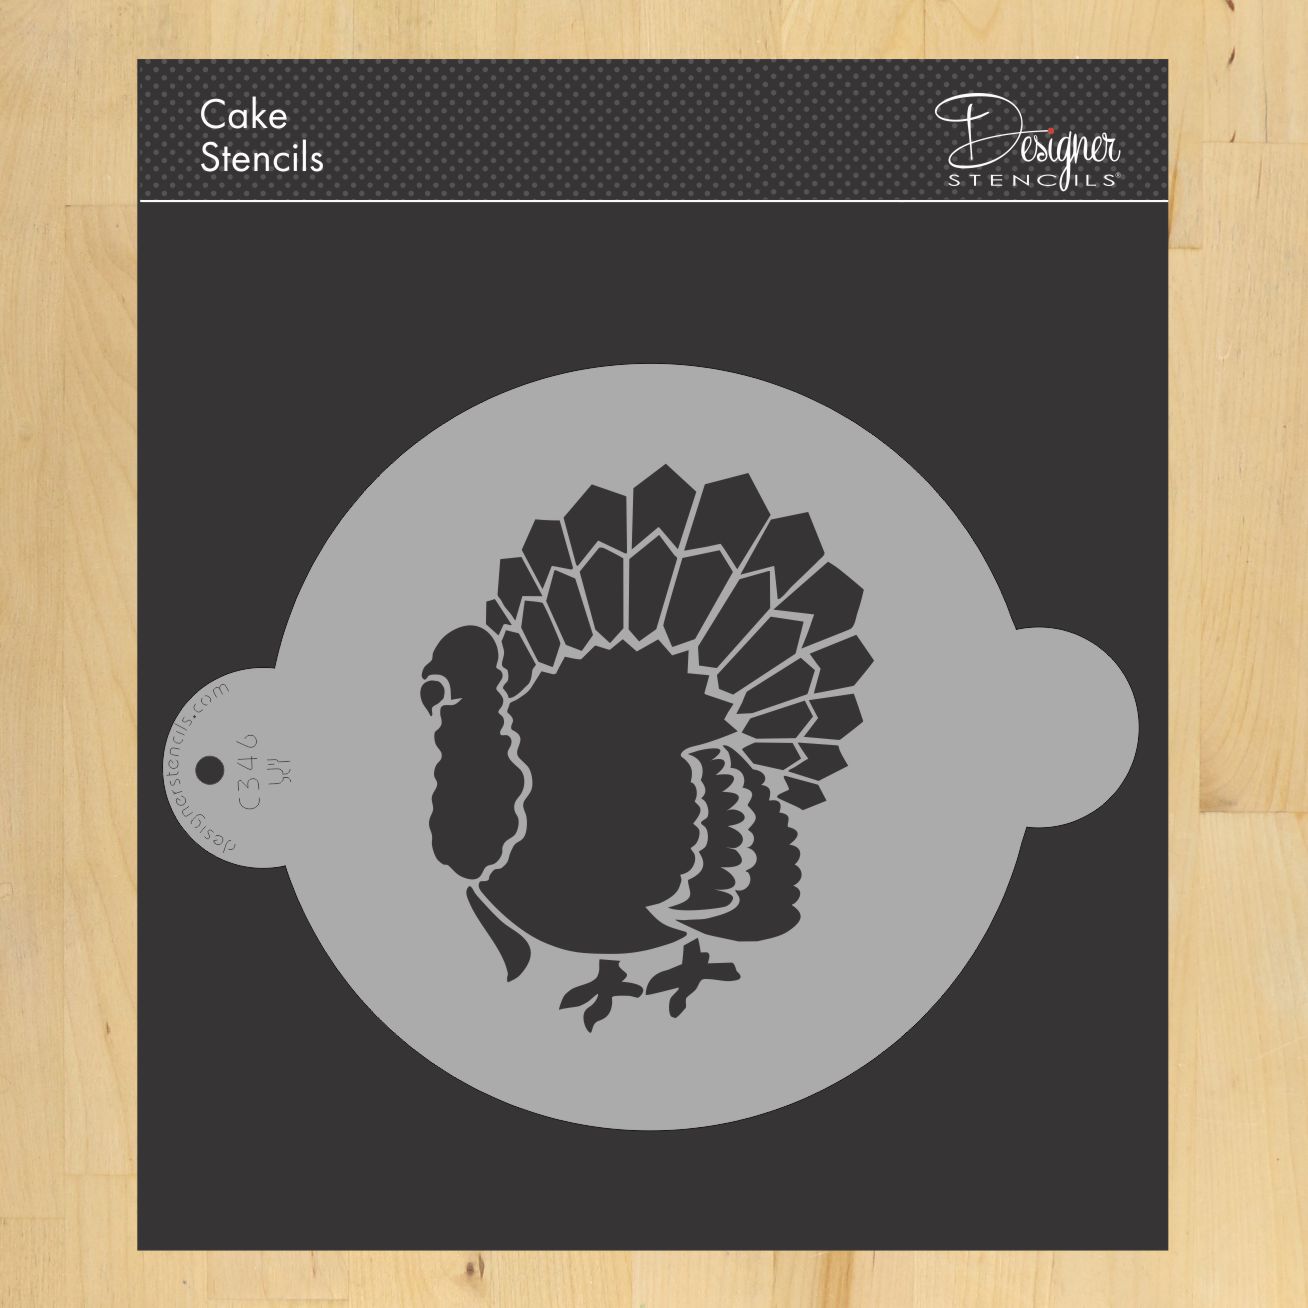 Round Stencil Top for Pies and Turkey Cakes – Confection Couture Stencils